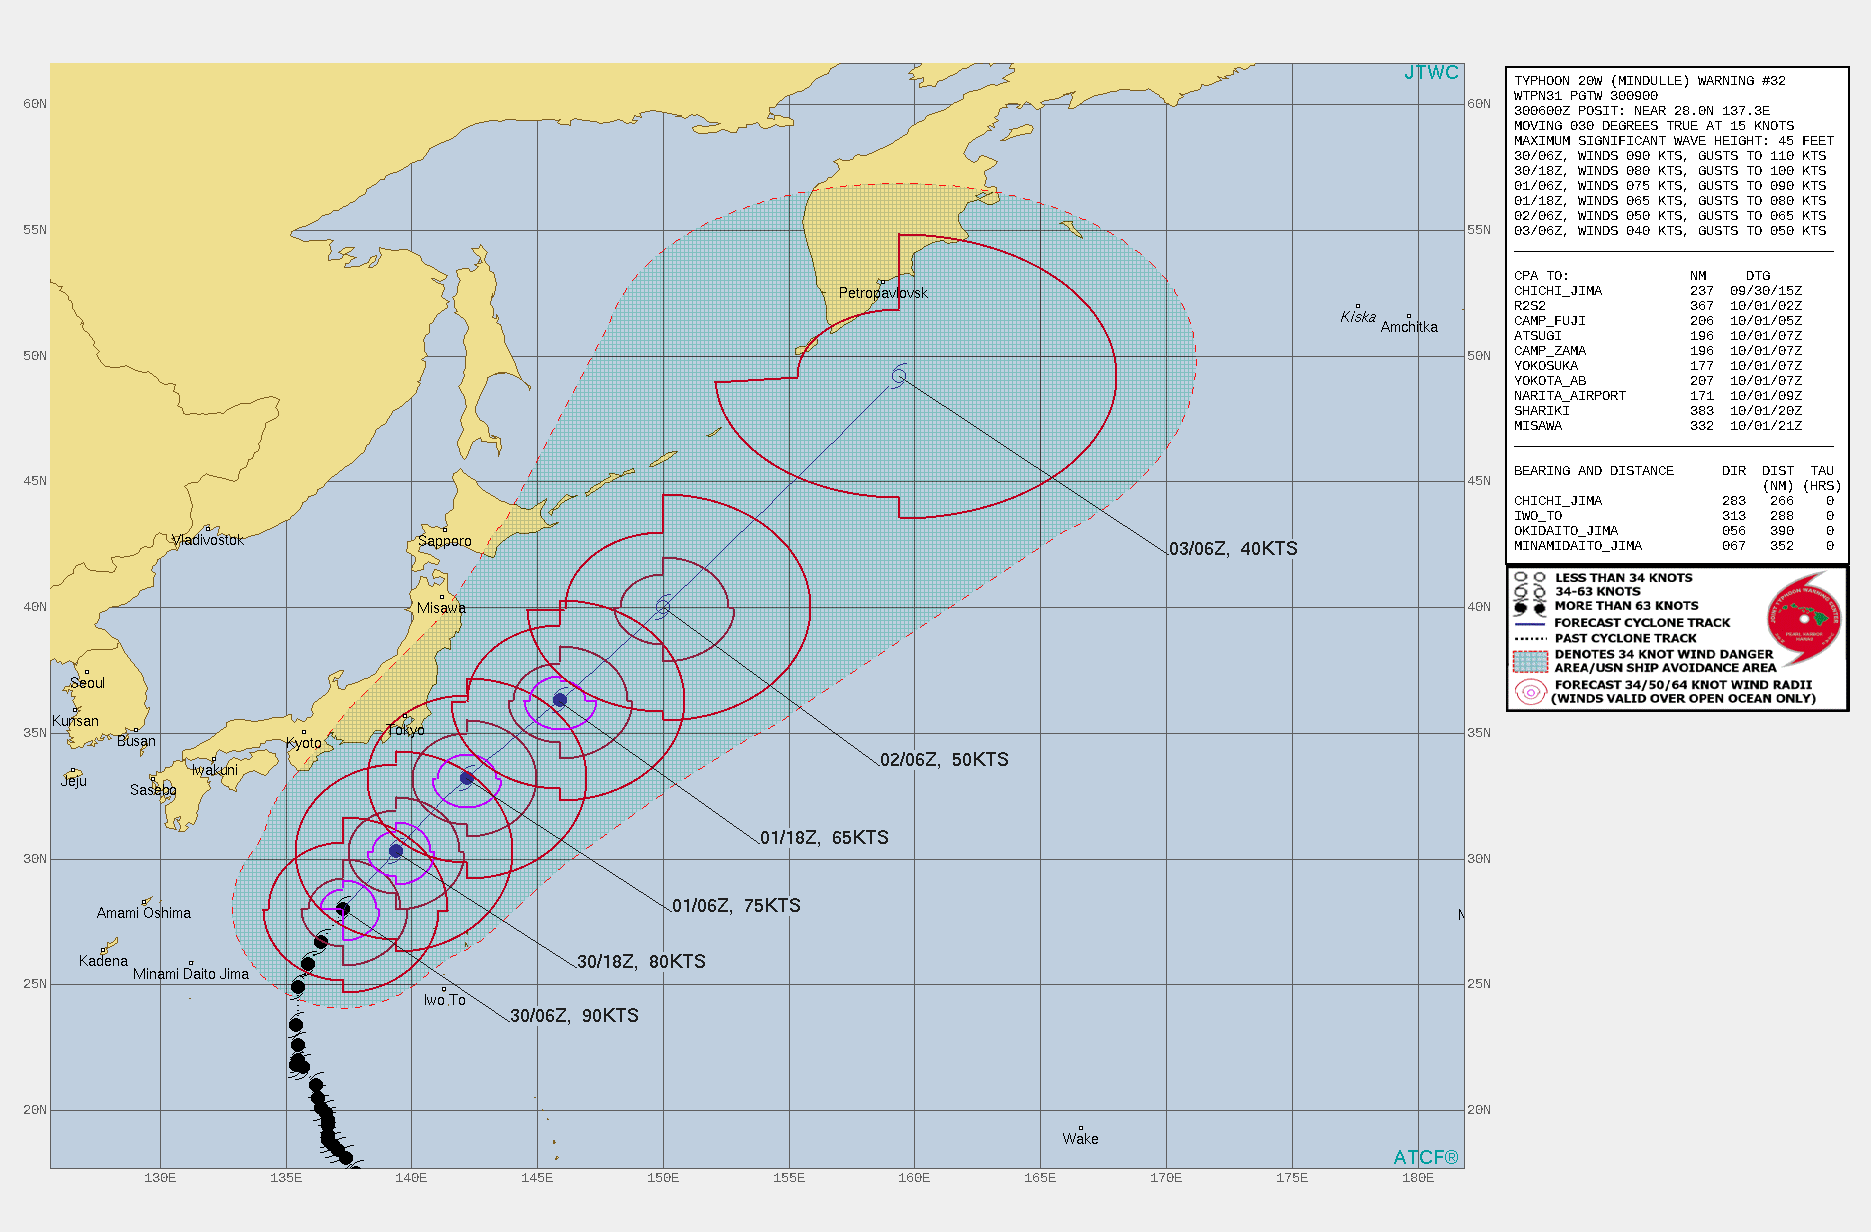 FORECAST REASONING.SIGNIFICANT FORECAST CHANGES: THERE ARE NO SIGNIFICANT CHANGES TO THE FORECAST FROM THE PREVIOUS WARNING.  FORECAST DISCUSSION: TYPHOON MINDULLE WILL CONTINUE ON ITS CURRENT TRACK FOR THE REMAINDER OF THE FORECAST. THE ENVIRONMENT WILL SLOWLY DEGRADE WITH CONTINUED COLD DRY AIR ENTRAINMENT AND DECREASING SSTS AS THE CYCLONE MOVES FURTHER POLEWARD. CONCURRENTLY,  BY 48H, IT WILL BEGIN EXTRA-TROPICAL TRANSITION (ETT) AND BY  72H WILL TRANSFORM INTO A STRONG GALE-FORCE COLD CORE LOW WITH AN  EXPANSIVE WIND FIELD AS IT APPROACHES THE SAKHALIN ISLAND.